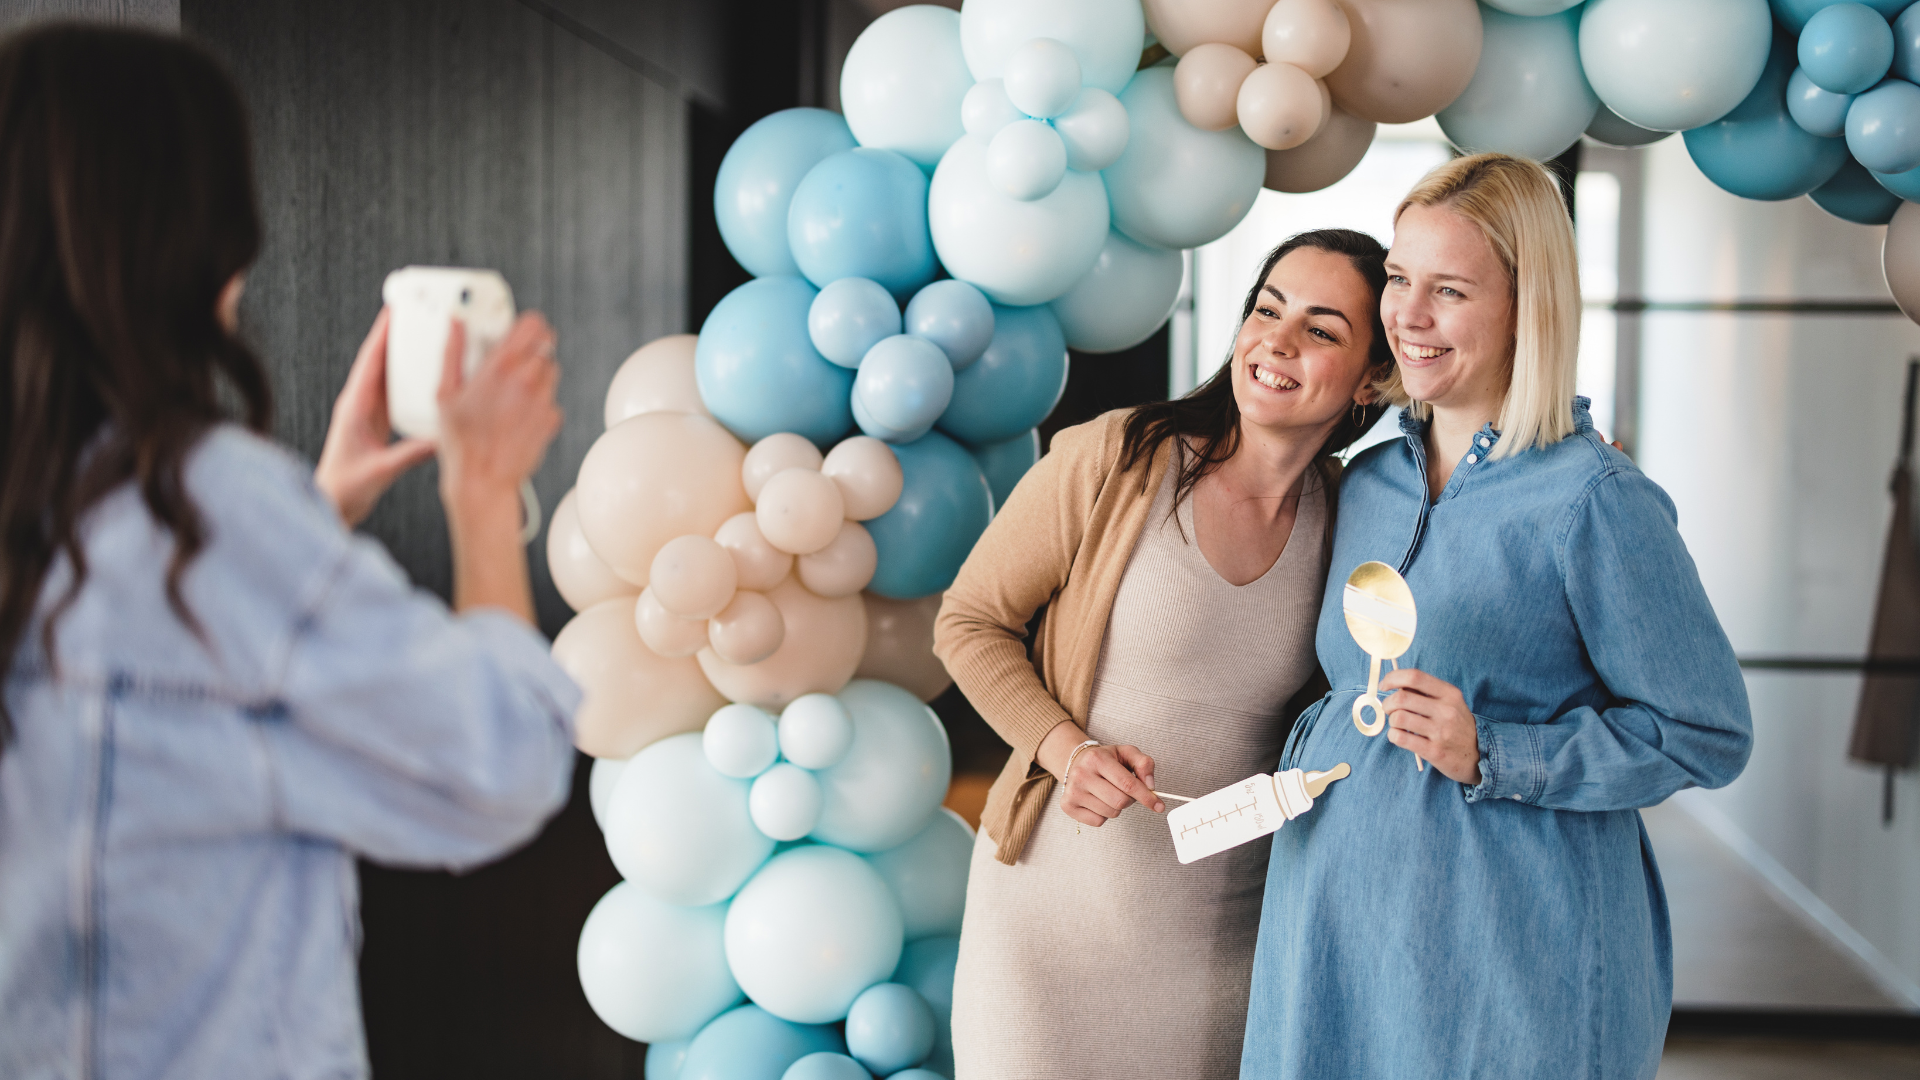 friend taking photo with pregnant lady at baby shower